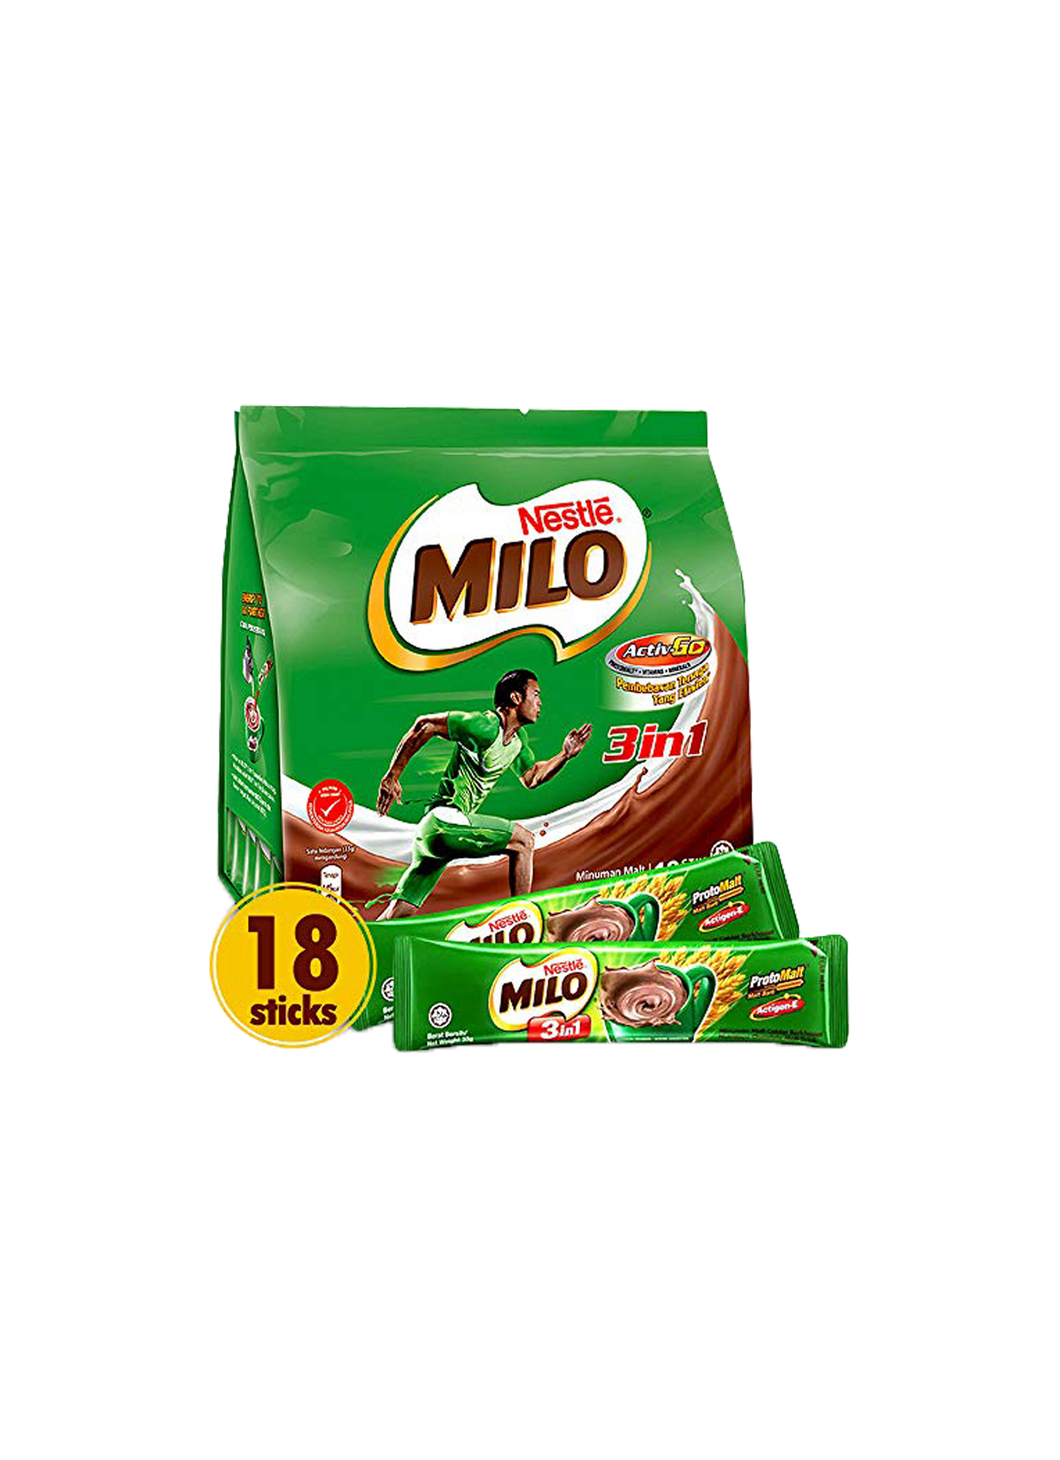 Nestle Milo Chocolate Malt Drink Powder (3 in 1 with cereals) Individual Packets 35g